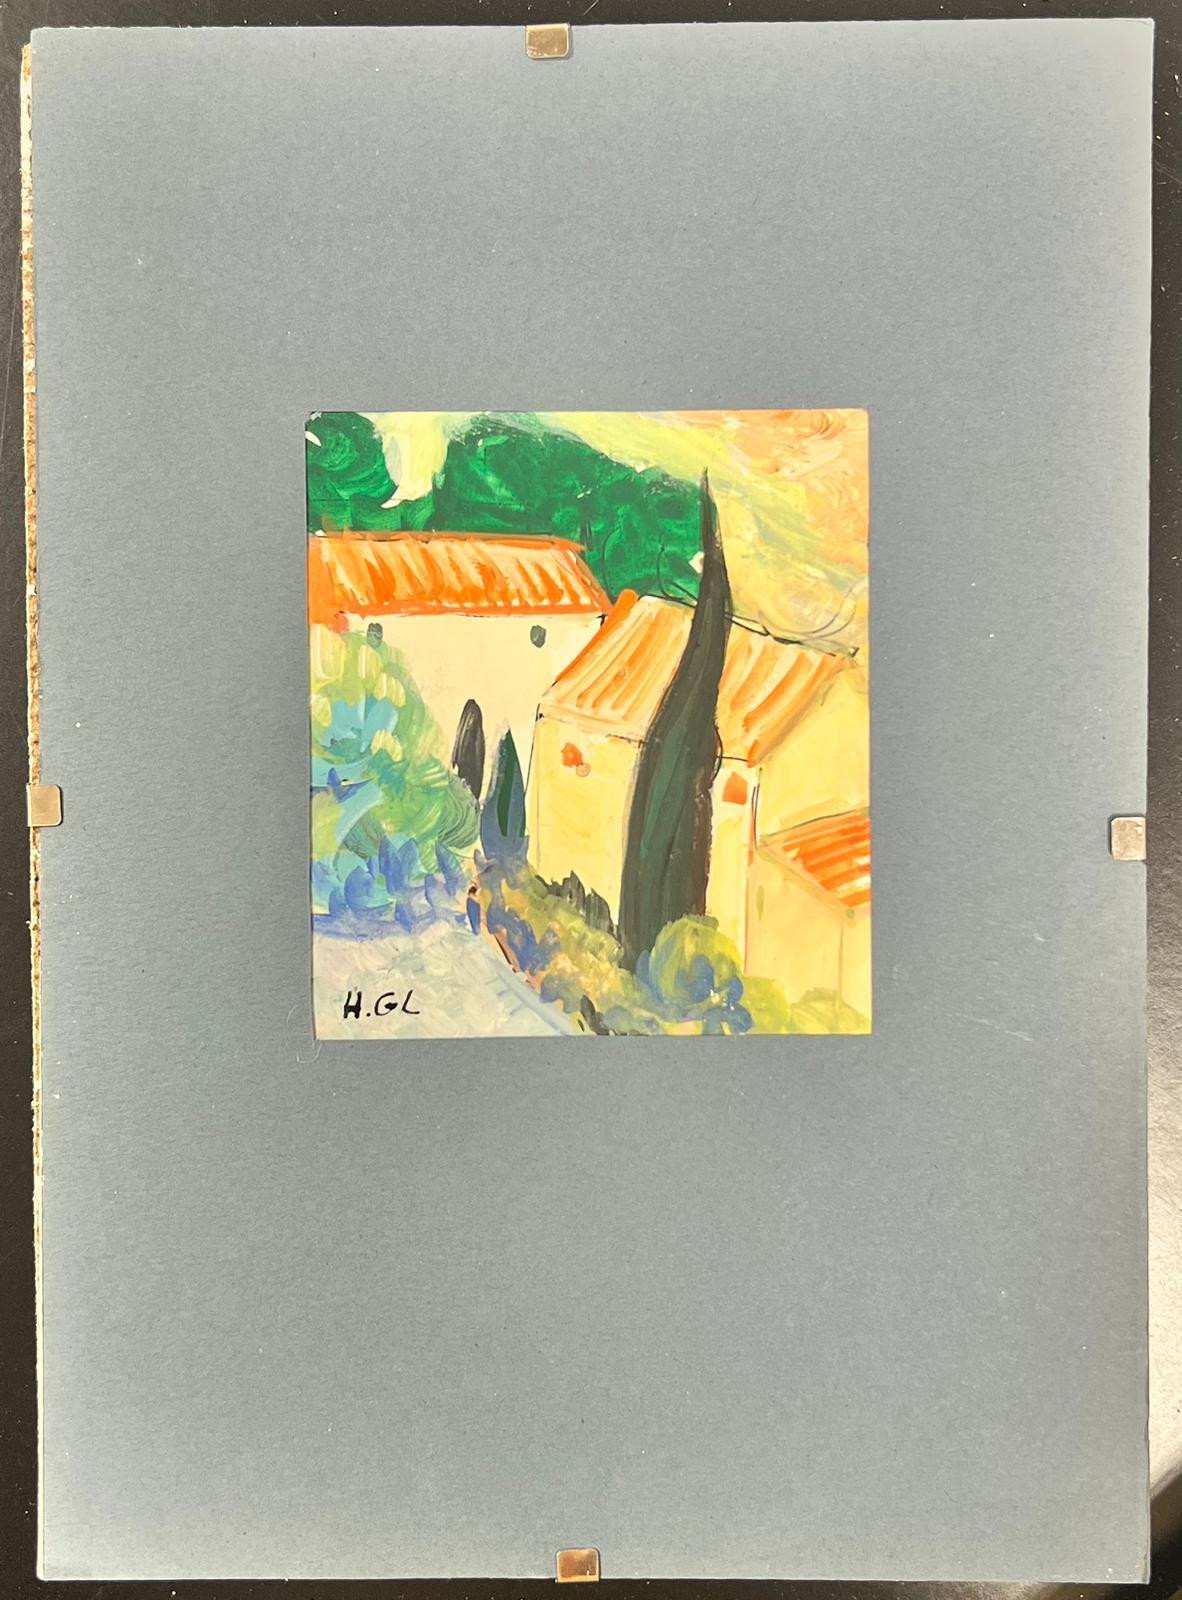 Provence
Huguette Ginet-Lasnier (French 1927-2020)
signed
watercolor painting on paper, mounted on card
framed: 7 x 5.5 inches
canvas: 5 x 5 inches.
All the paintings we have for sale by this artist have come from the artists estate in France.
The